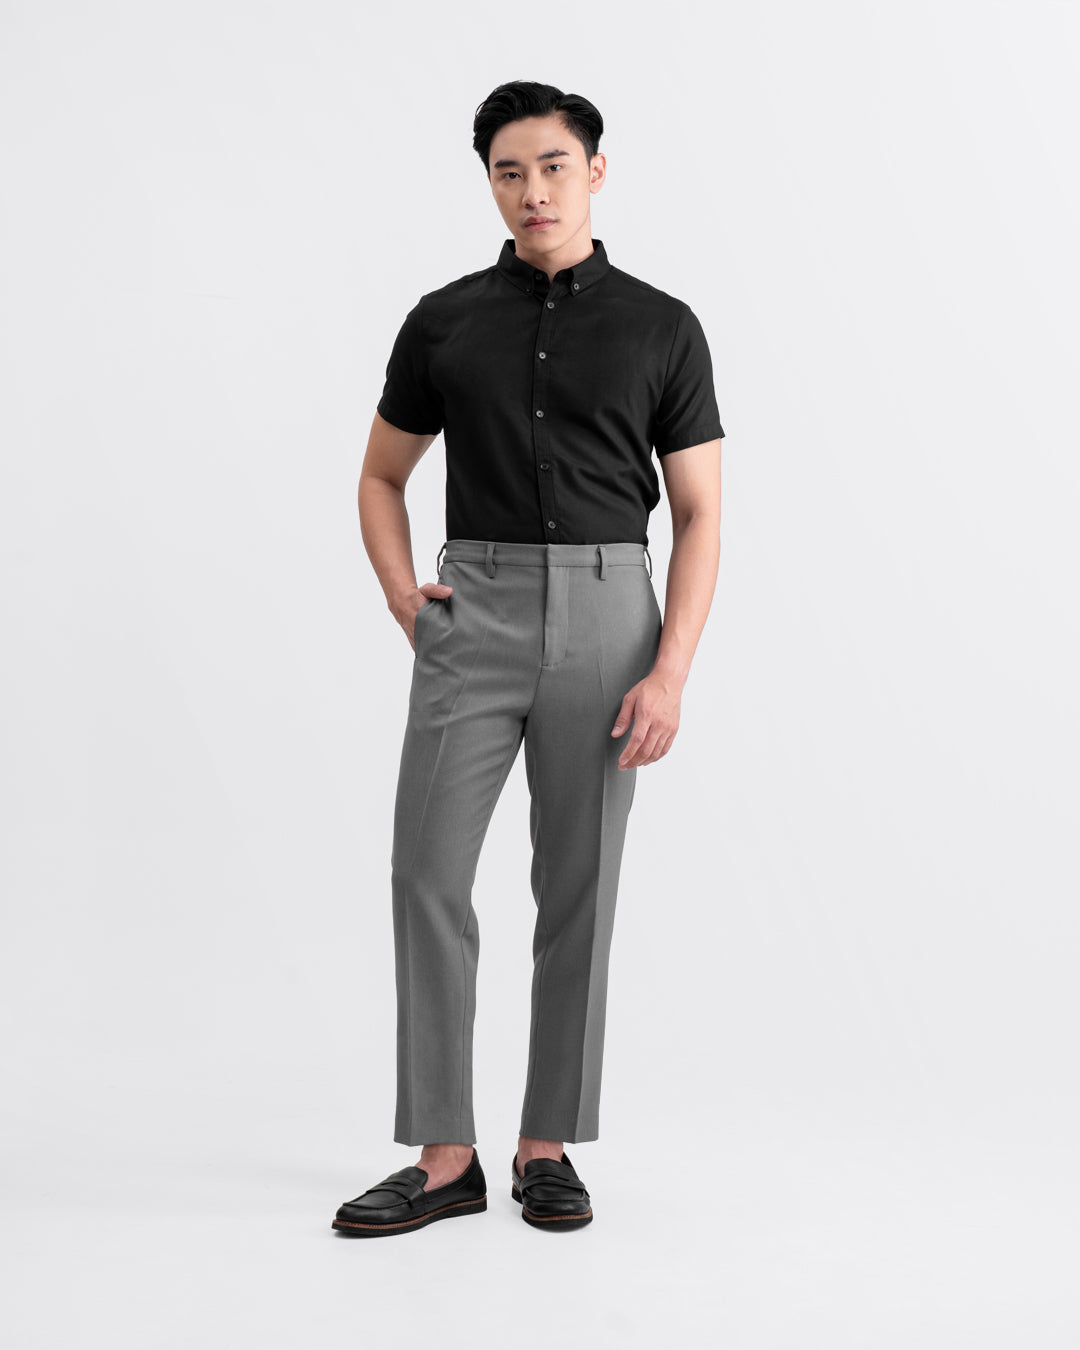 Tailor Ankle Pants Dark Gray